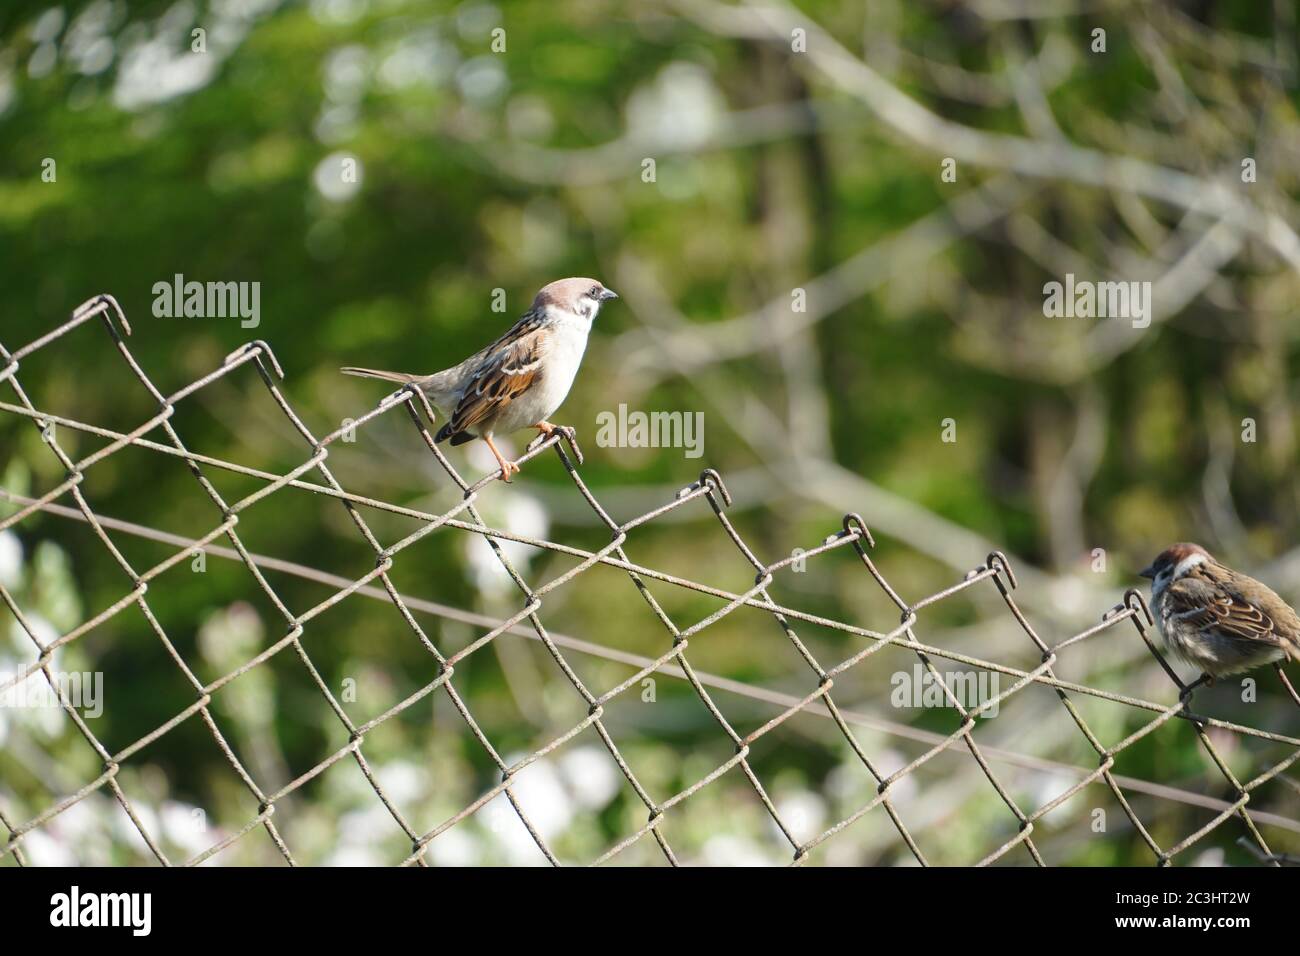 House sparrow on fence during spring Stock Photo